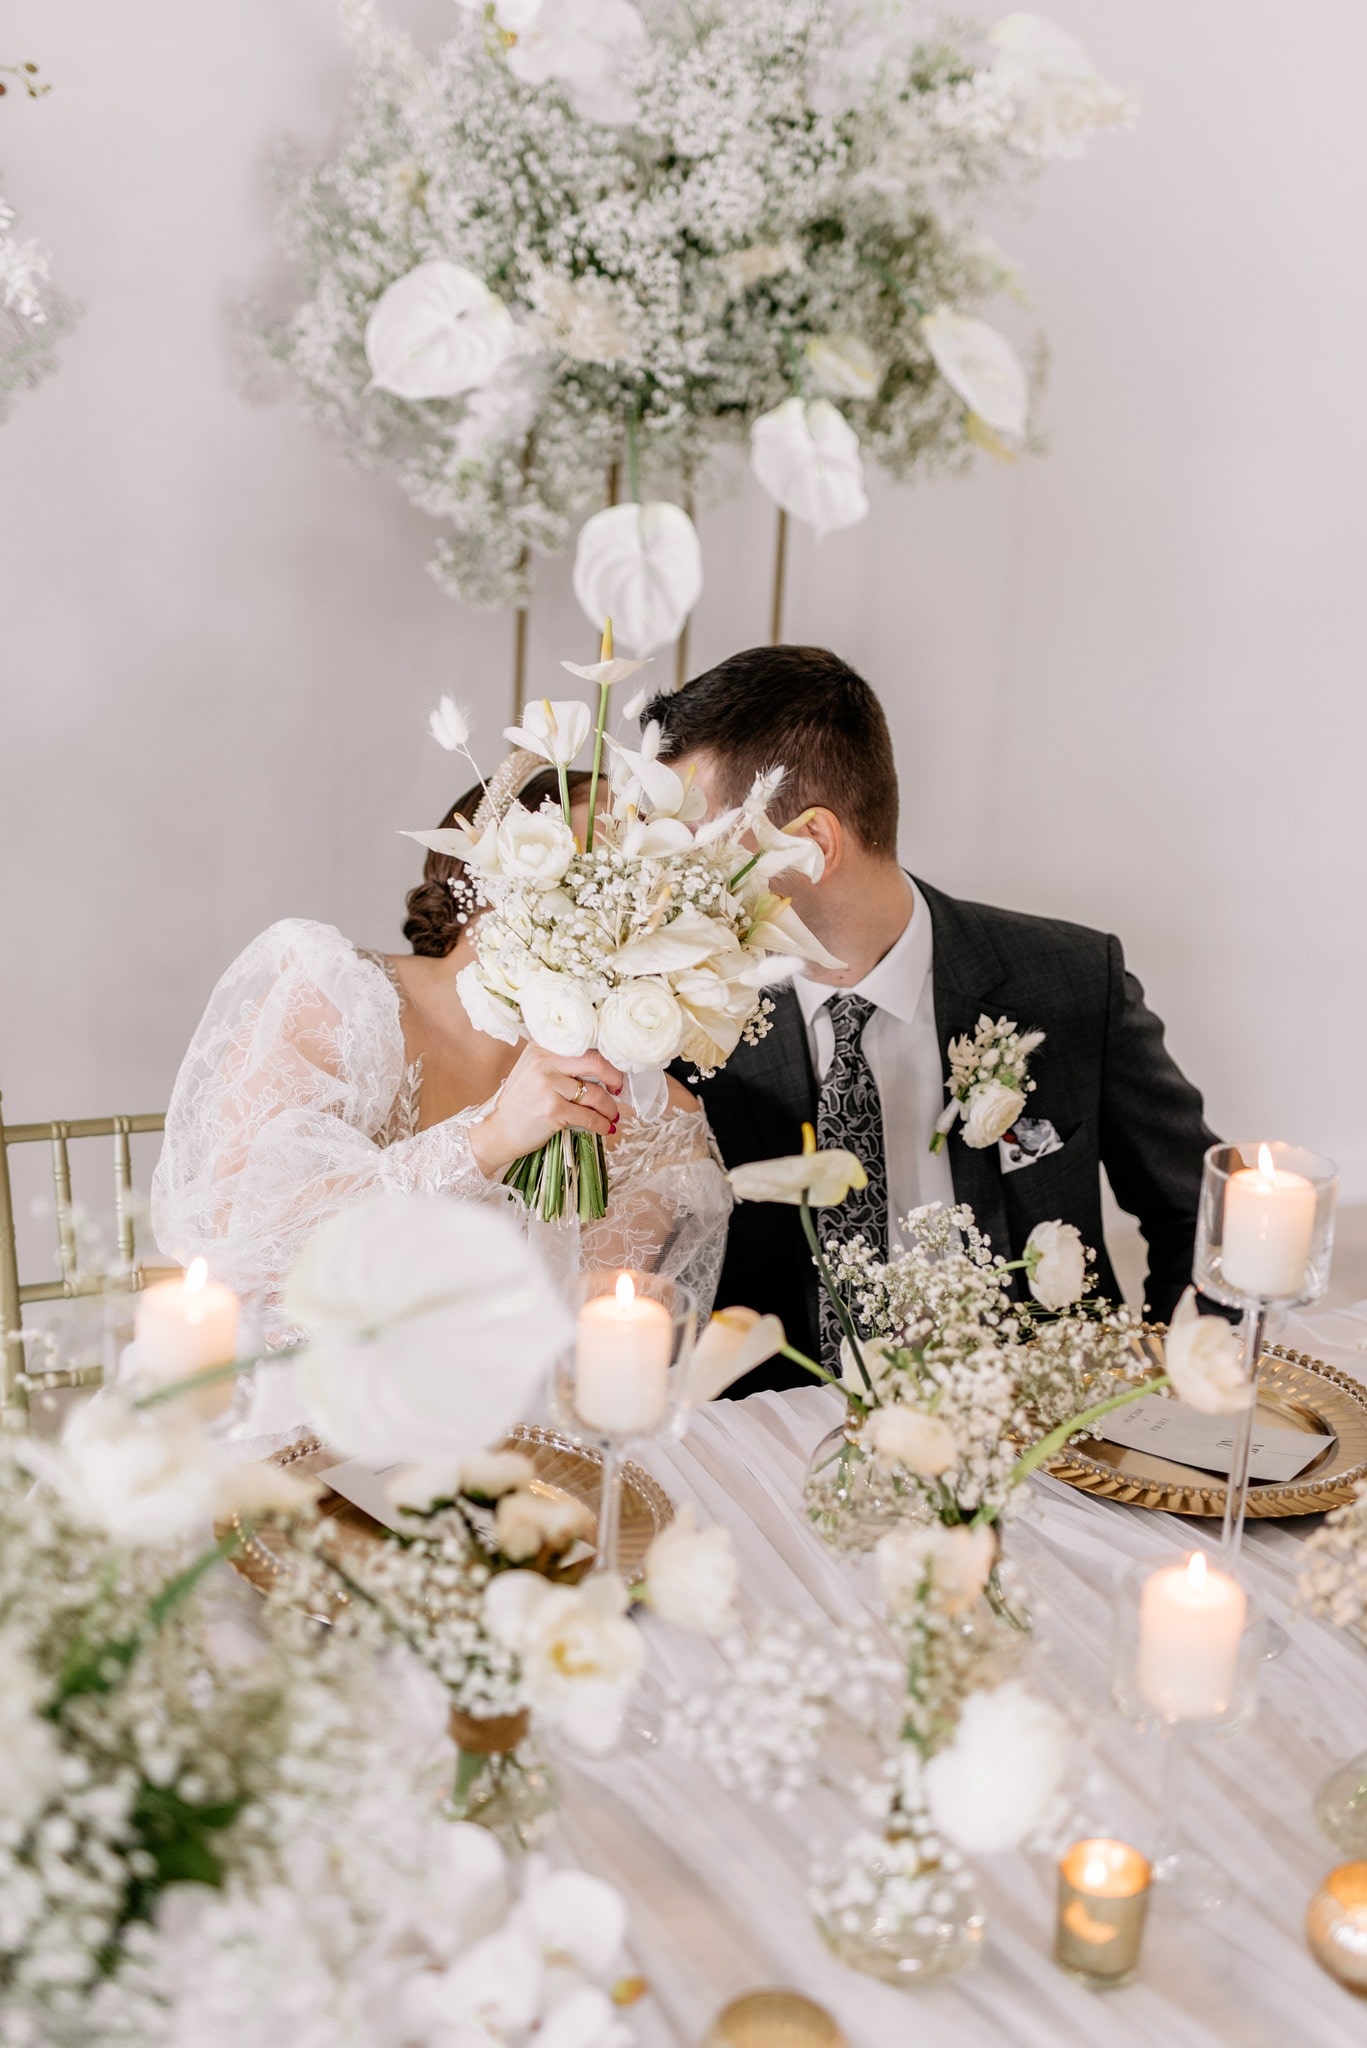 A bride and a groom sitting at a decorated table and kissing